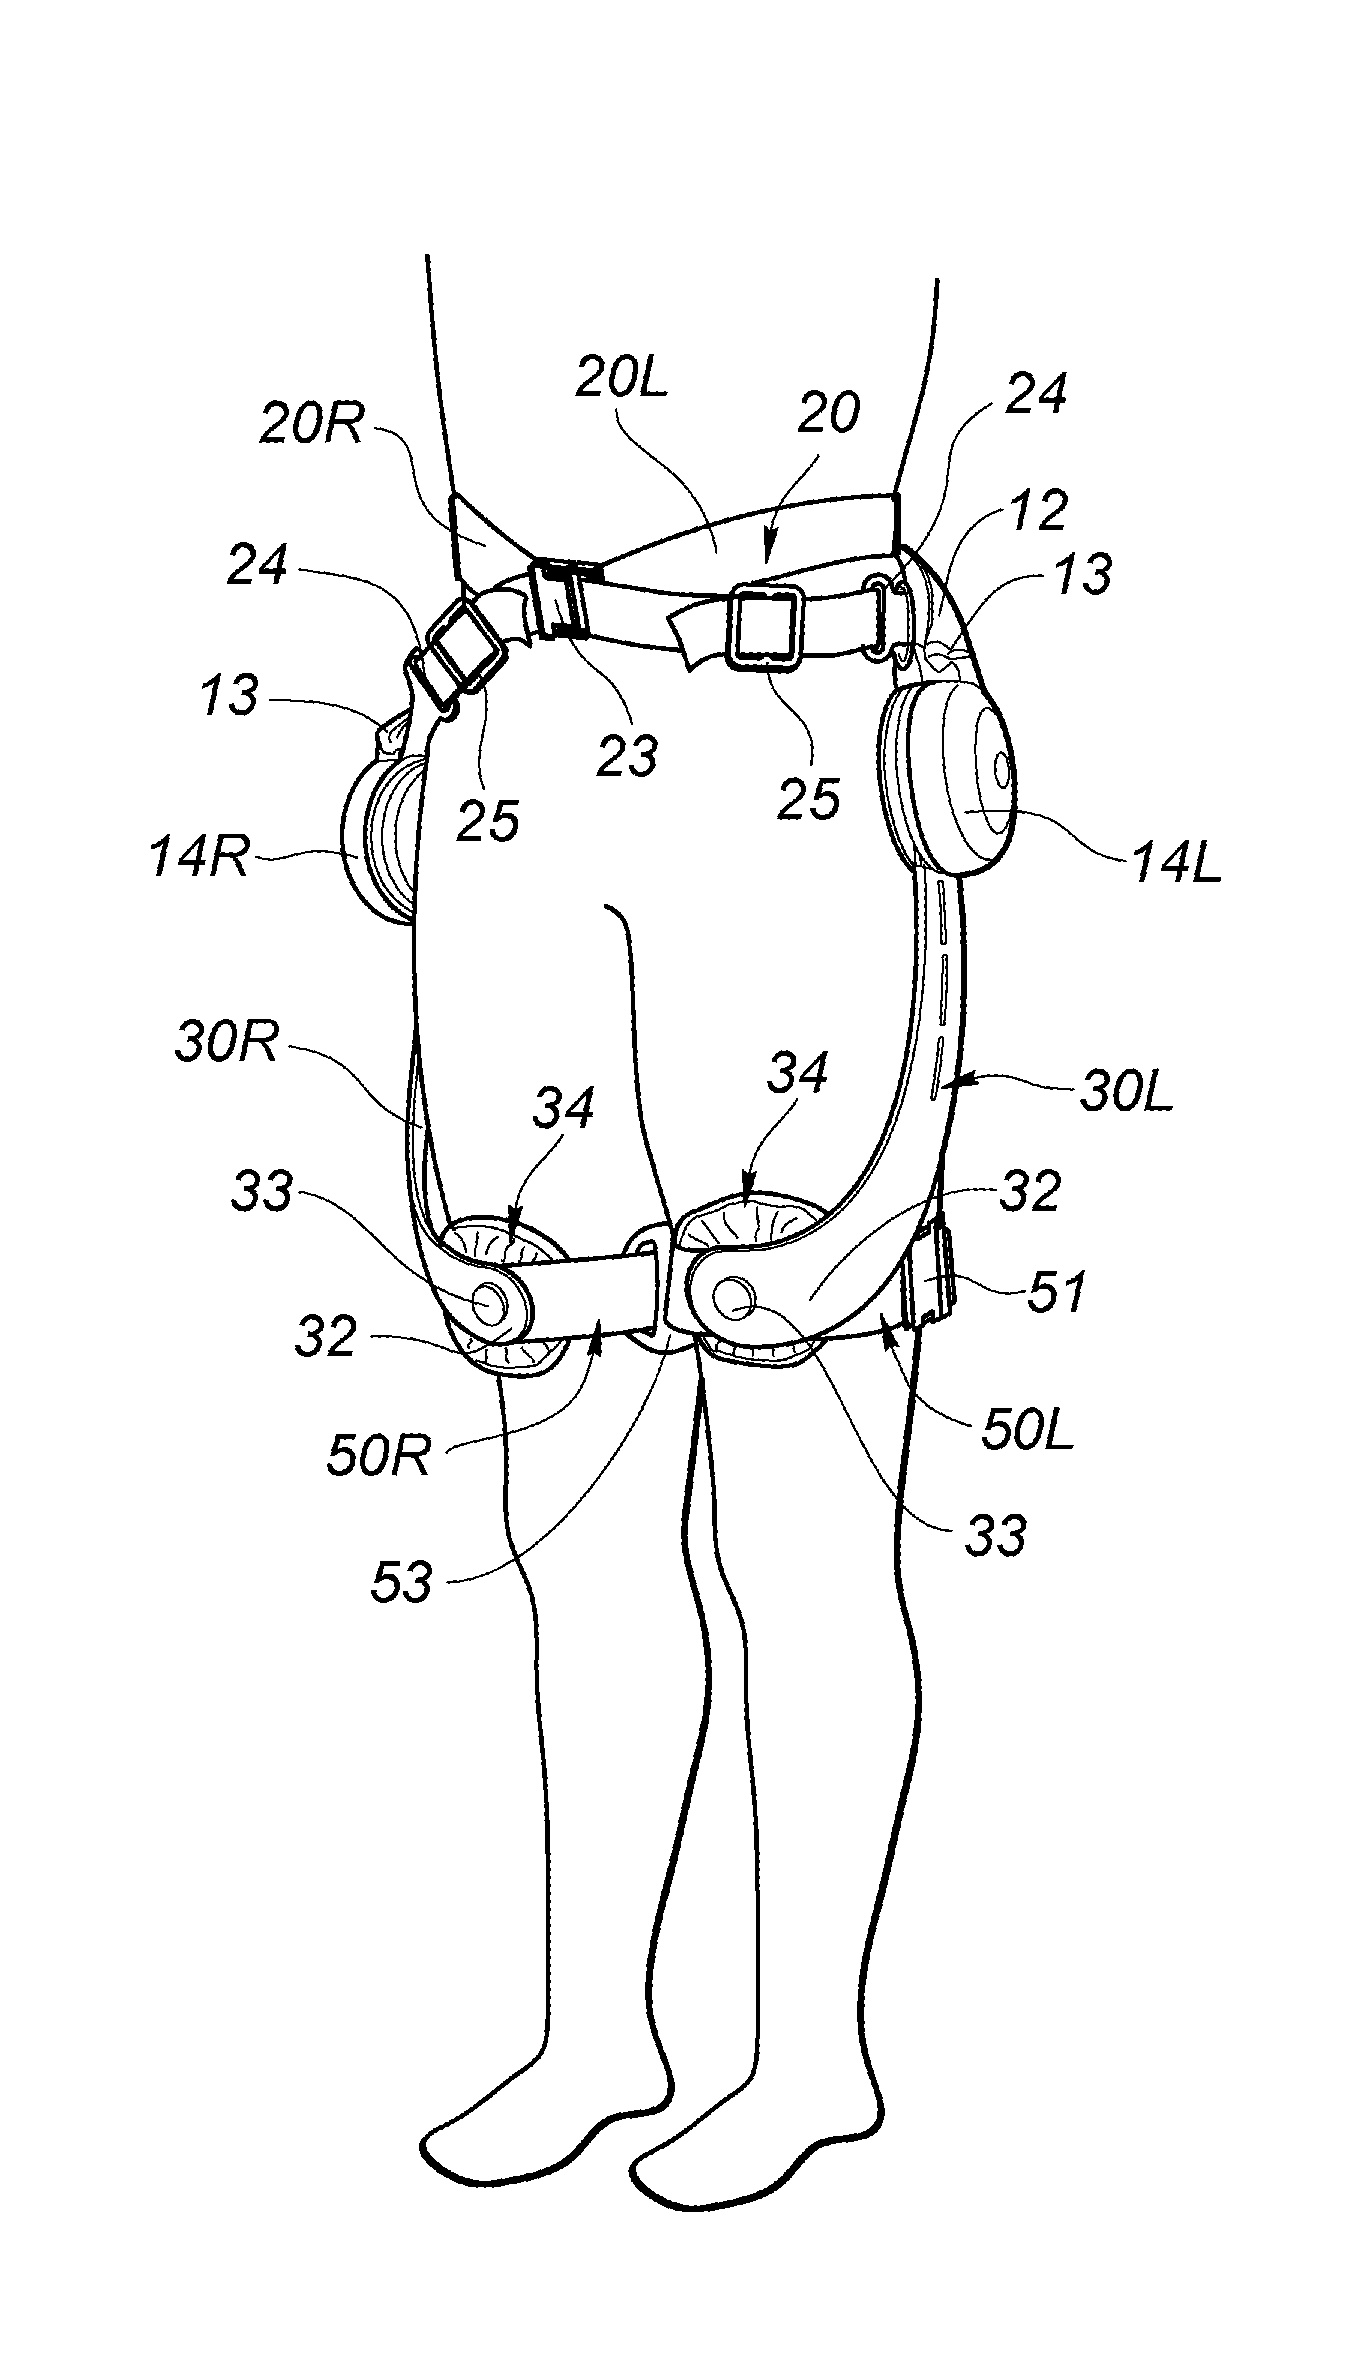 Walking assistance device for providing a walking assistance force to a femoral part of a user